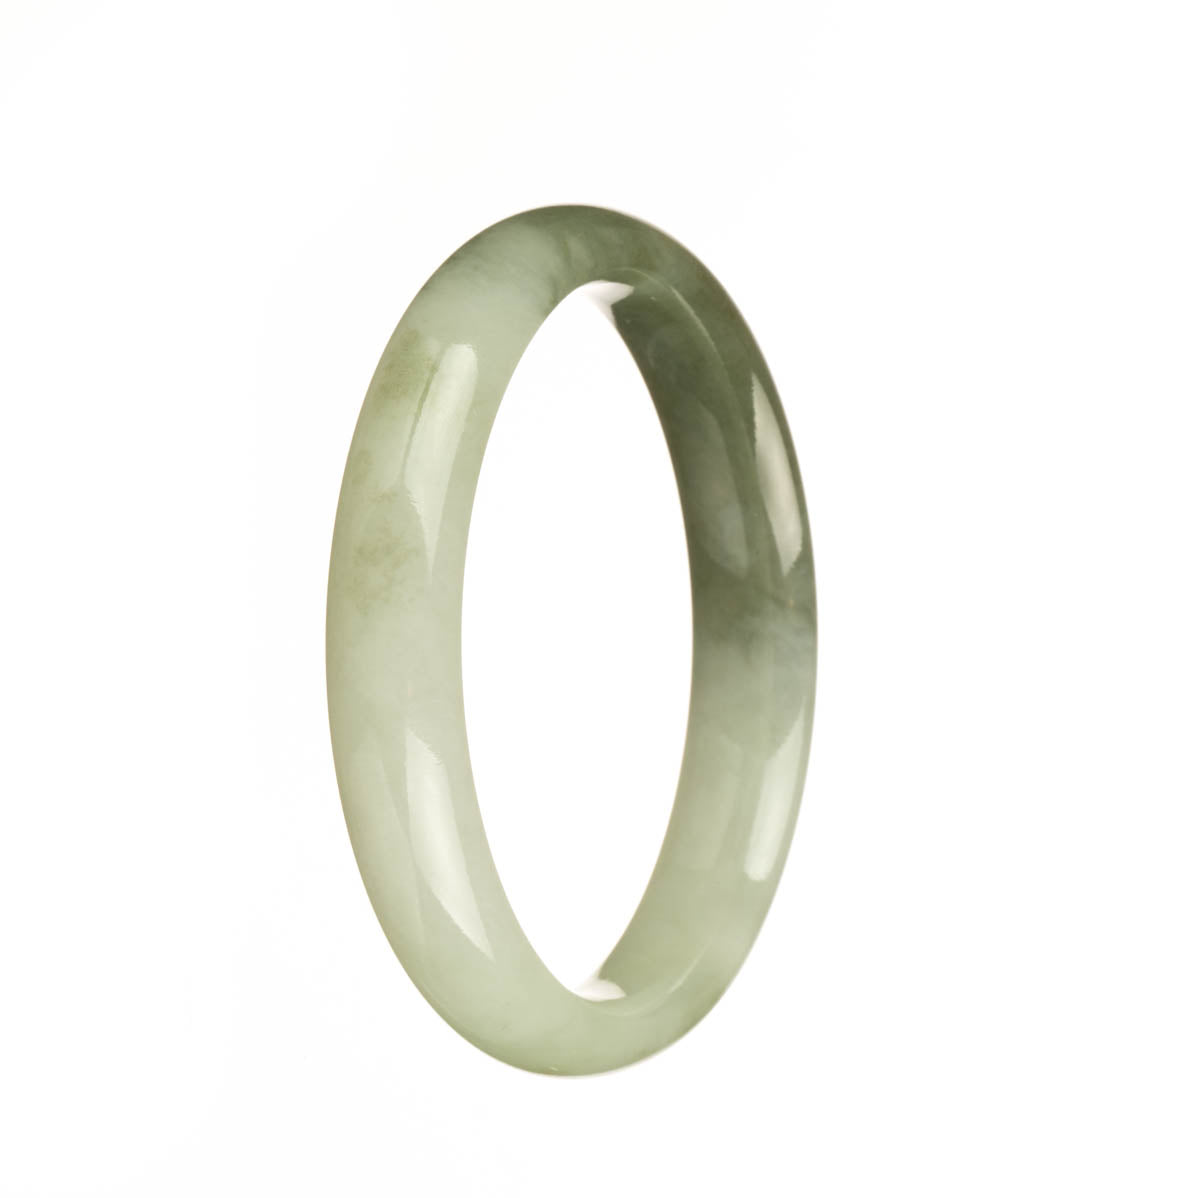 Genuine Type A Pale Green and Olive Green Jadeite Bangle - 56mm Half Moon